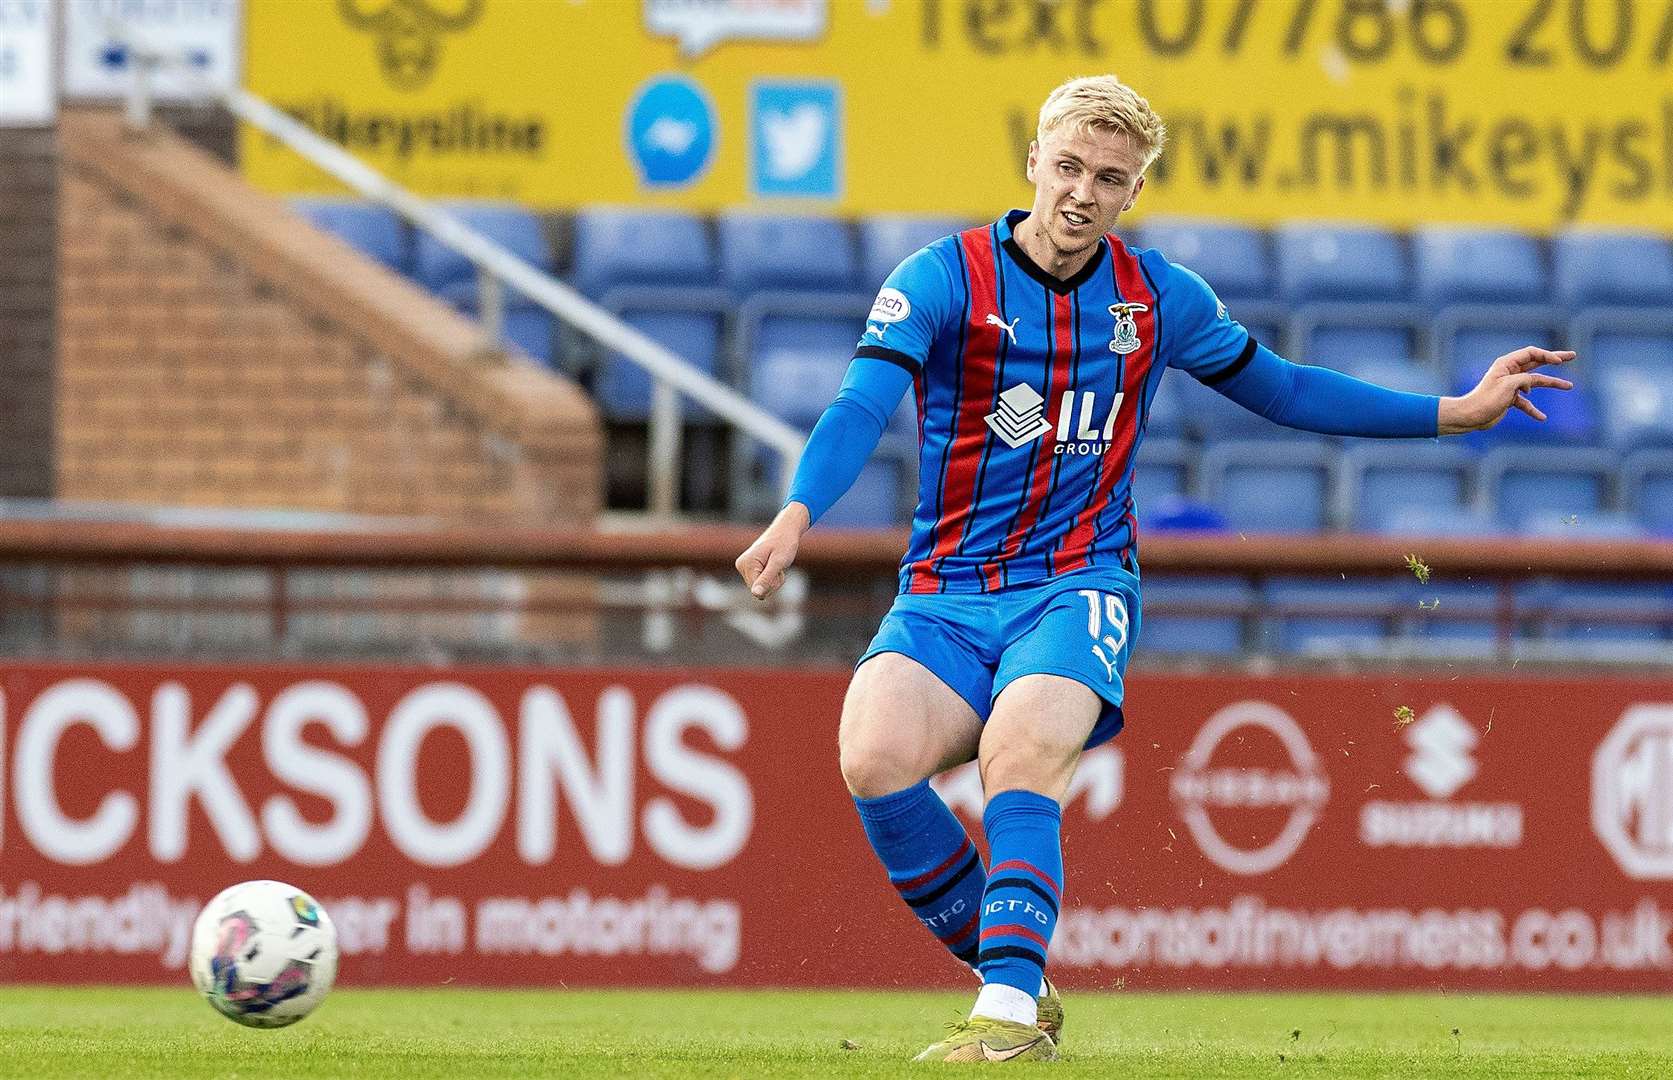 Luis Longstaff says Inverness Caledonian Thistle need to find the net to avoid defeat in the Championship Play-off.